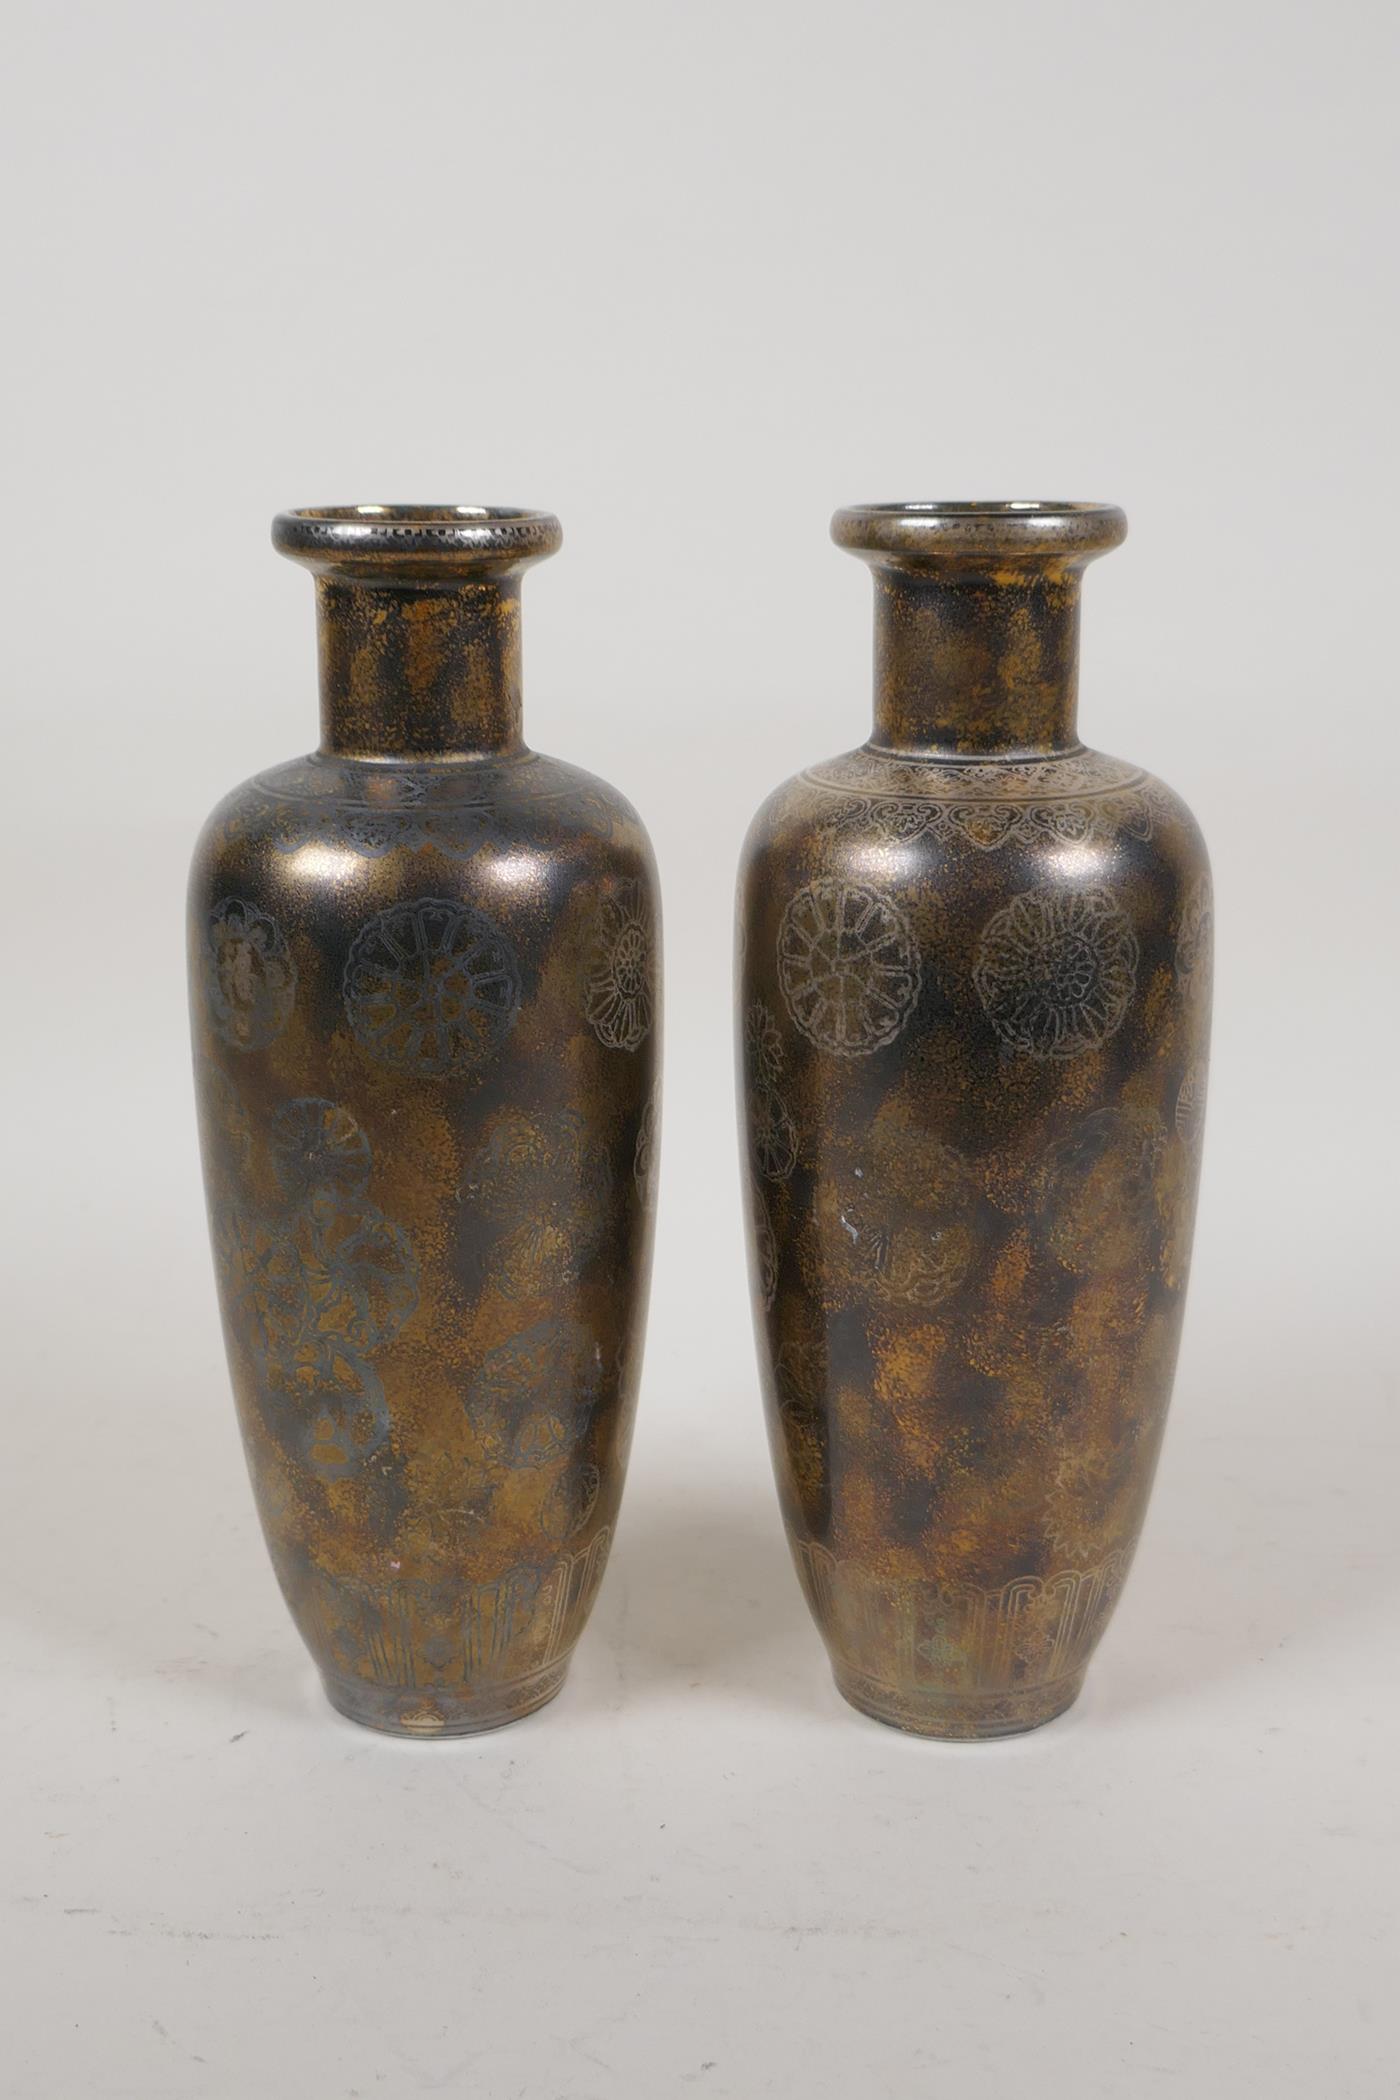 A pair of lustre glazed porcelain vases with floral and character decoration, Chinese 4 character - Image 2 of 4